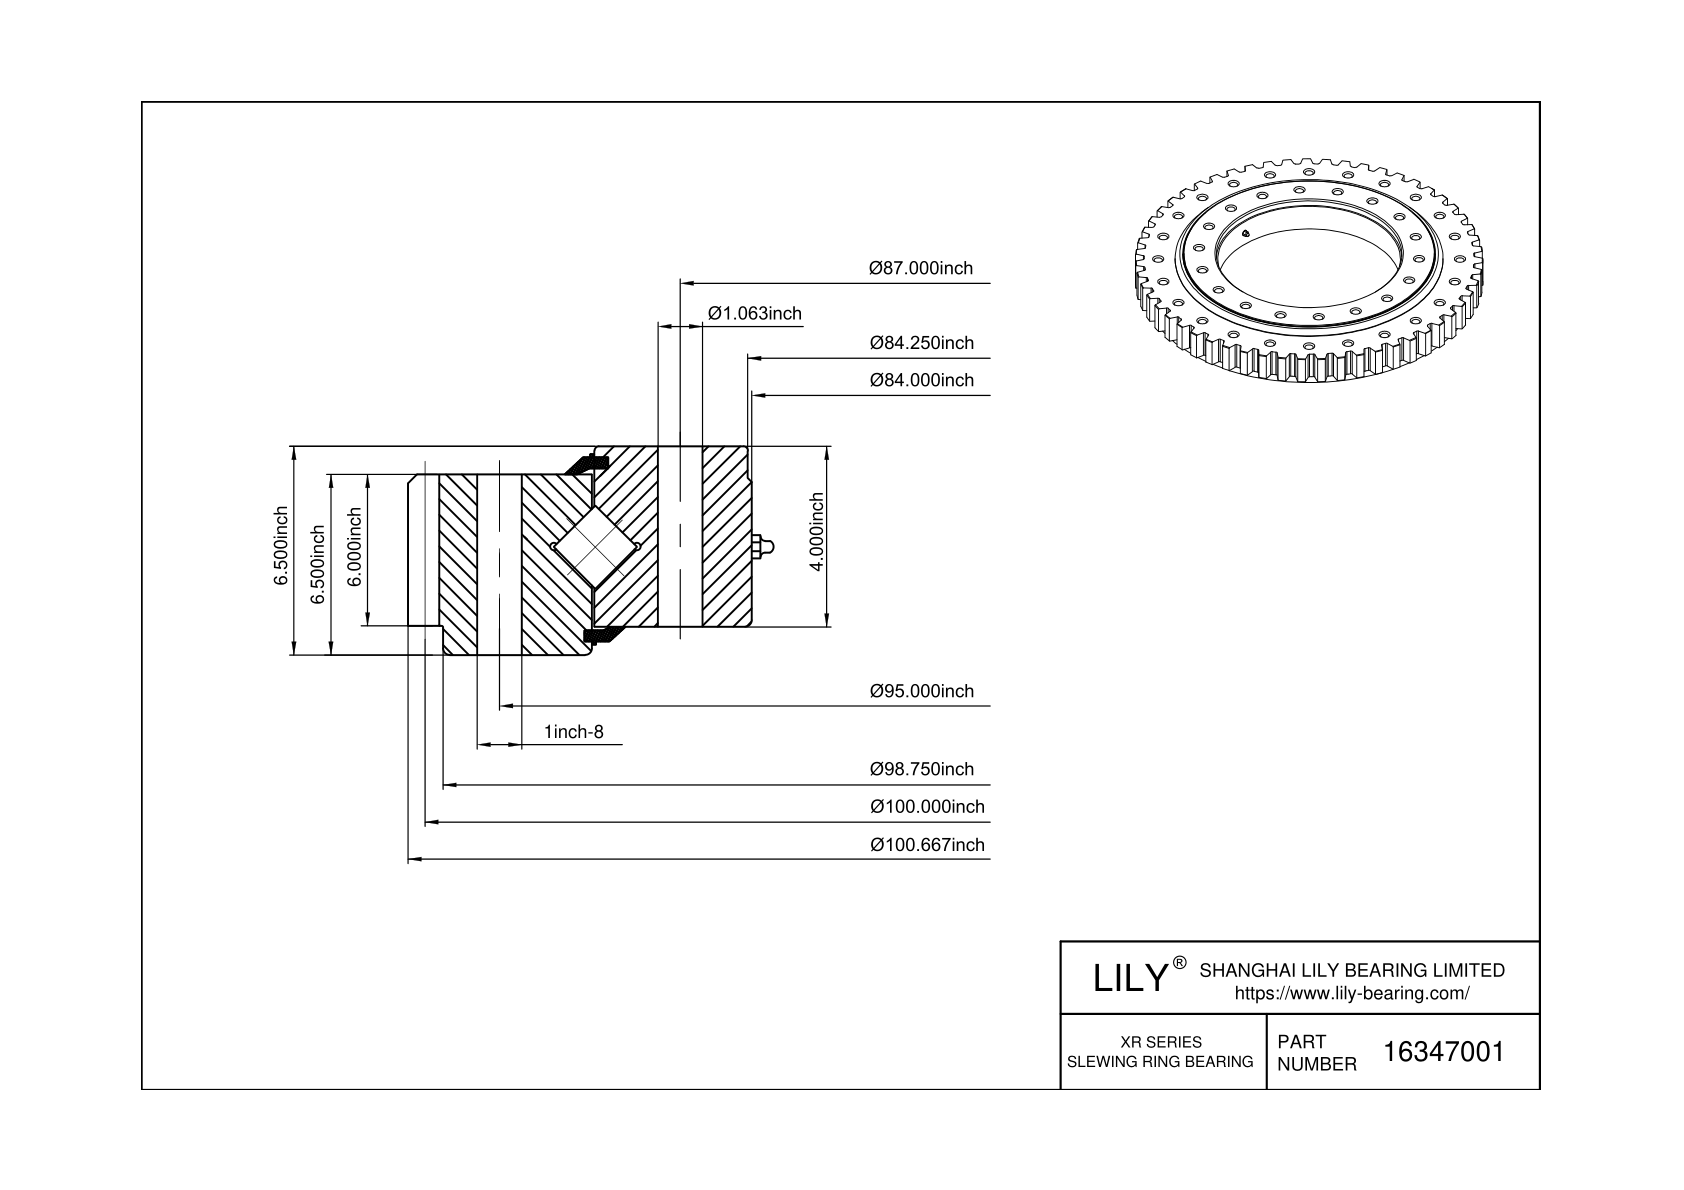 16347001 Cross Roller Slewing Ring Bearing cad drawing